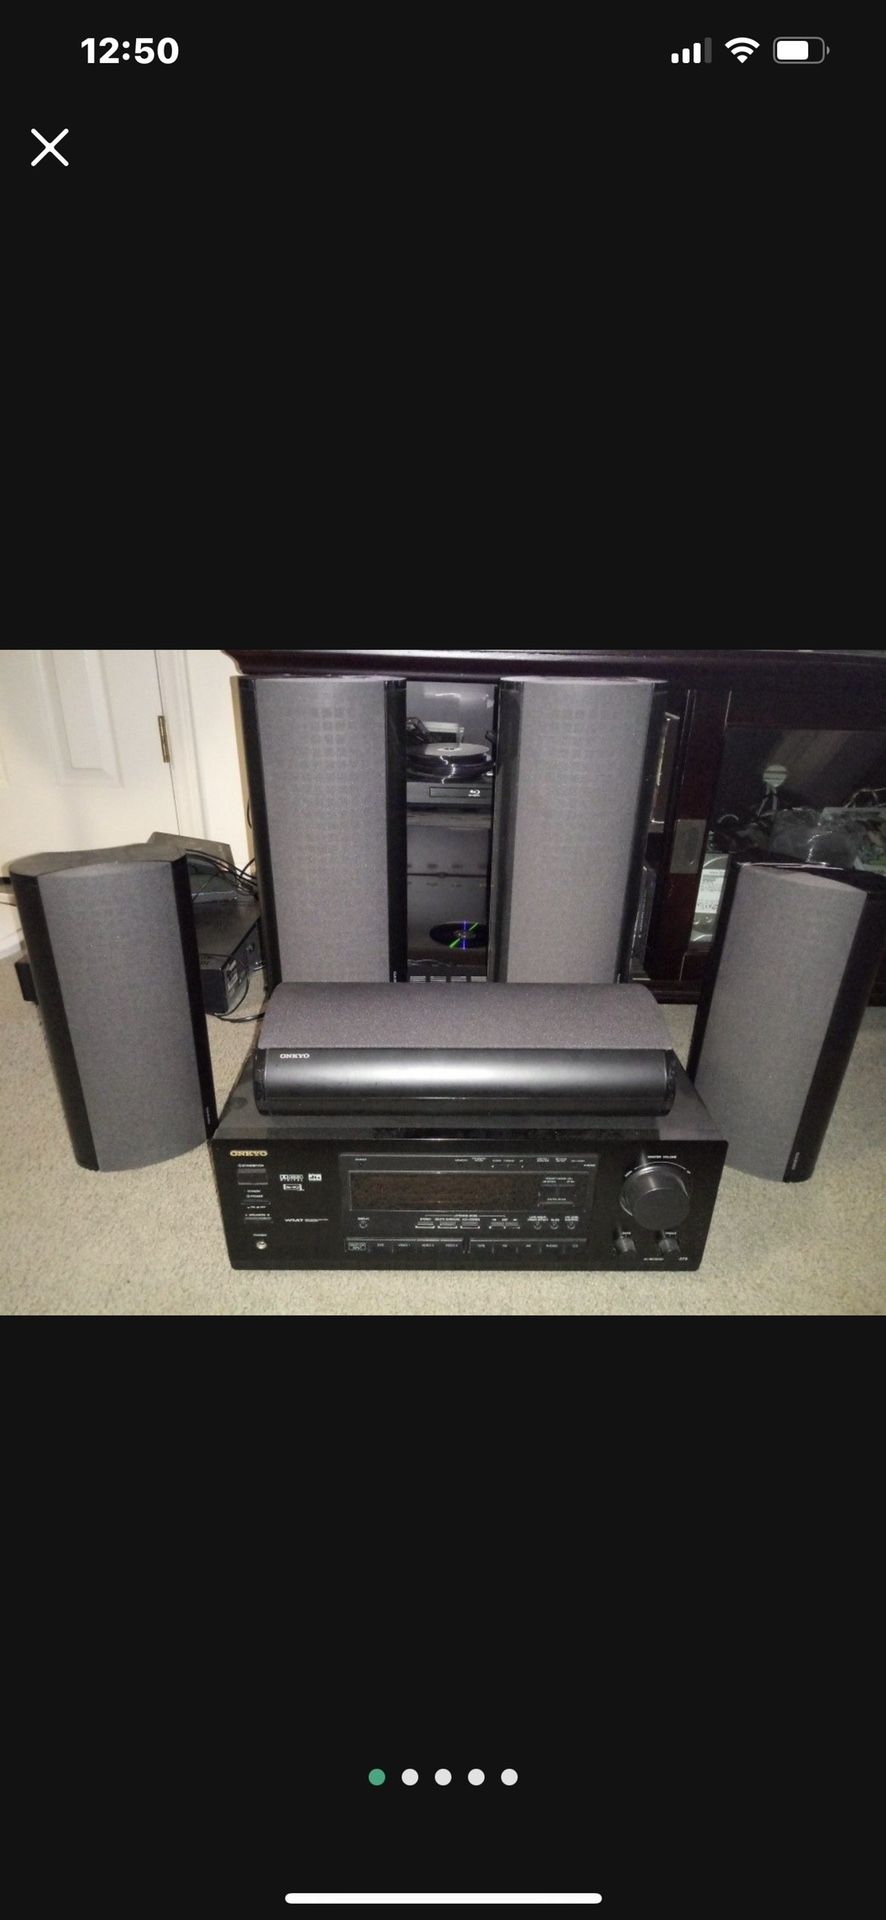 Nice home theater system